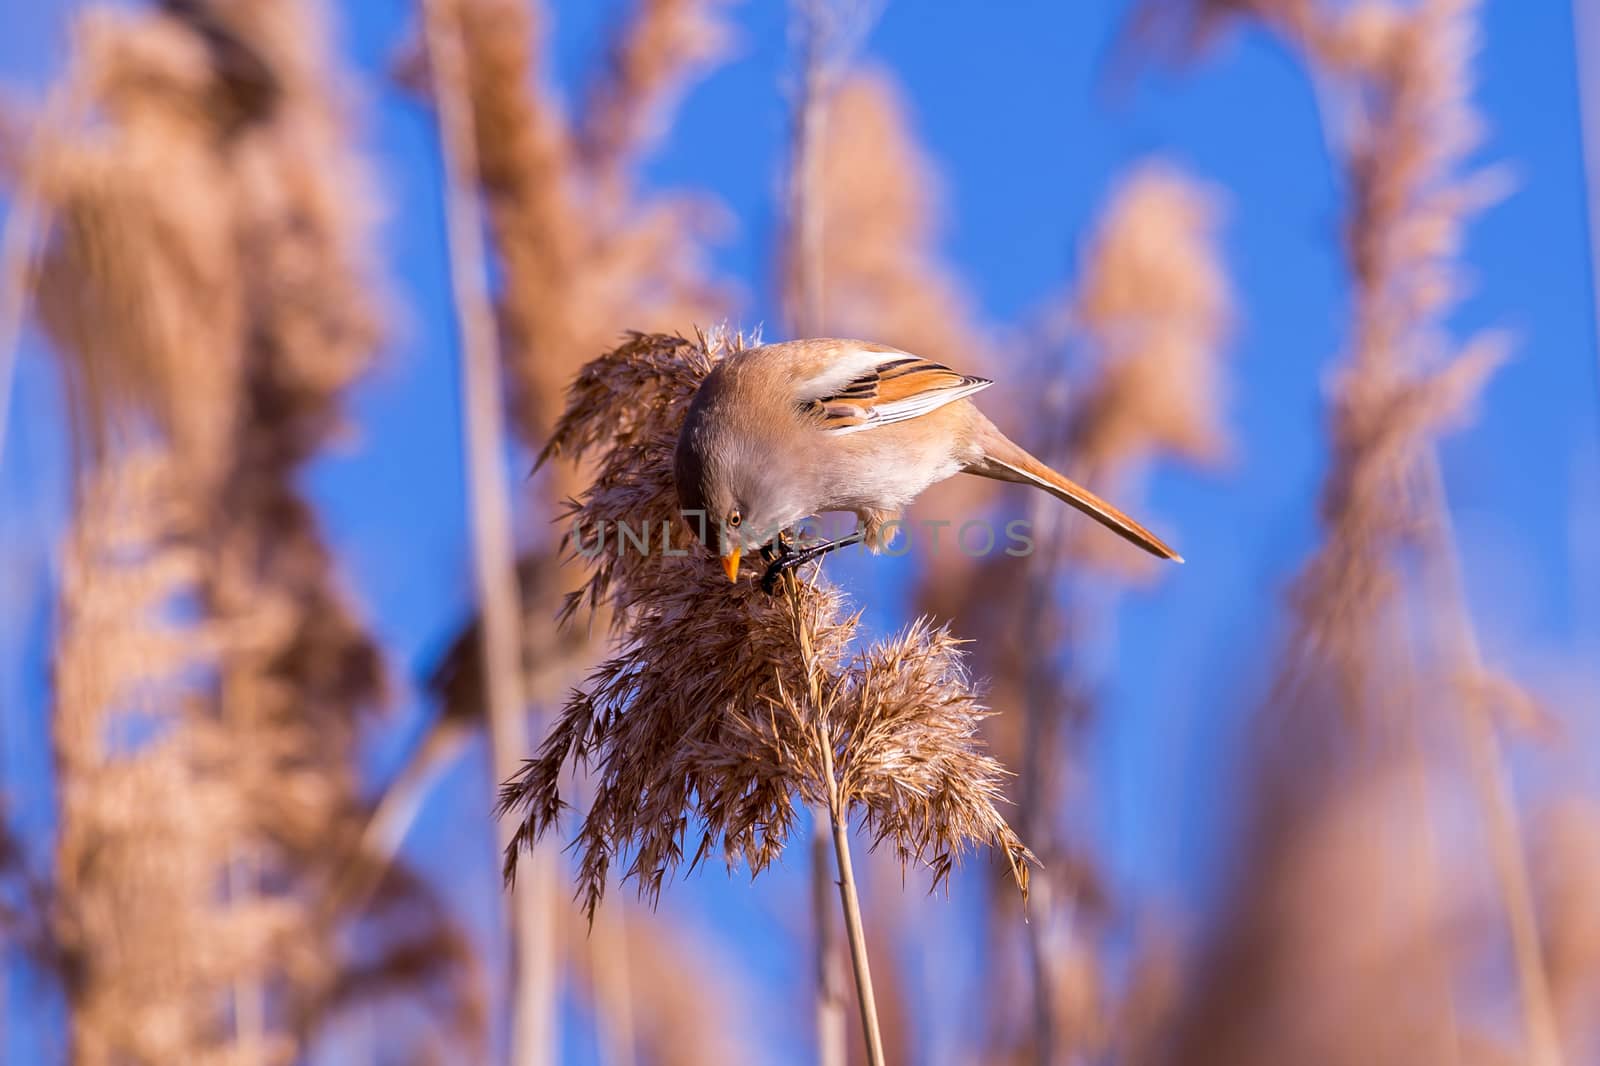 Bearded tit on the reed, male - reedling (Panurus biarmicus) by Digoarpi